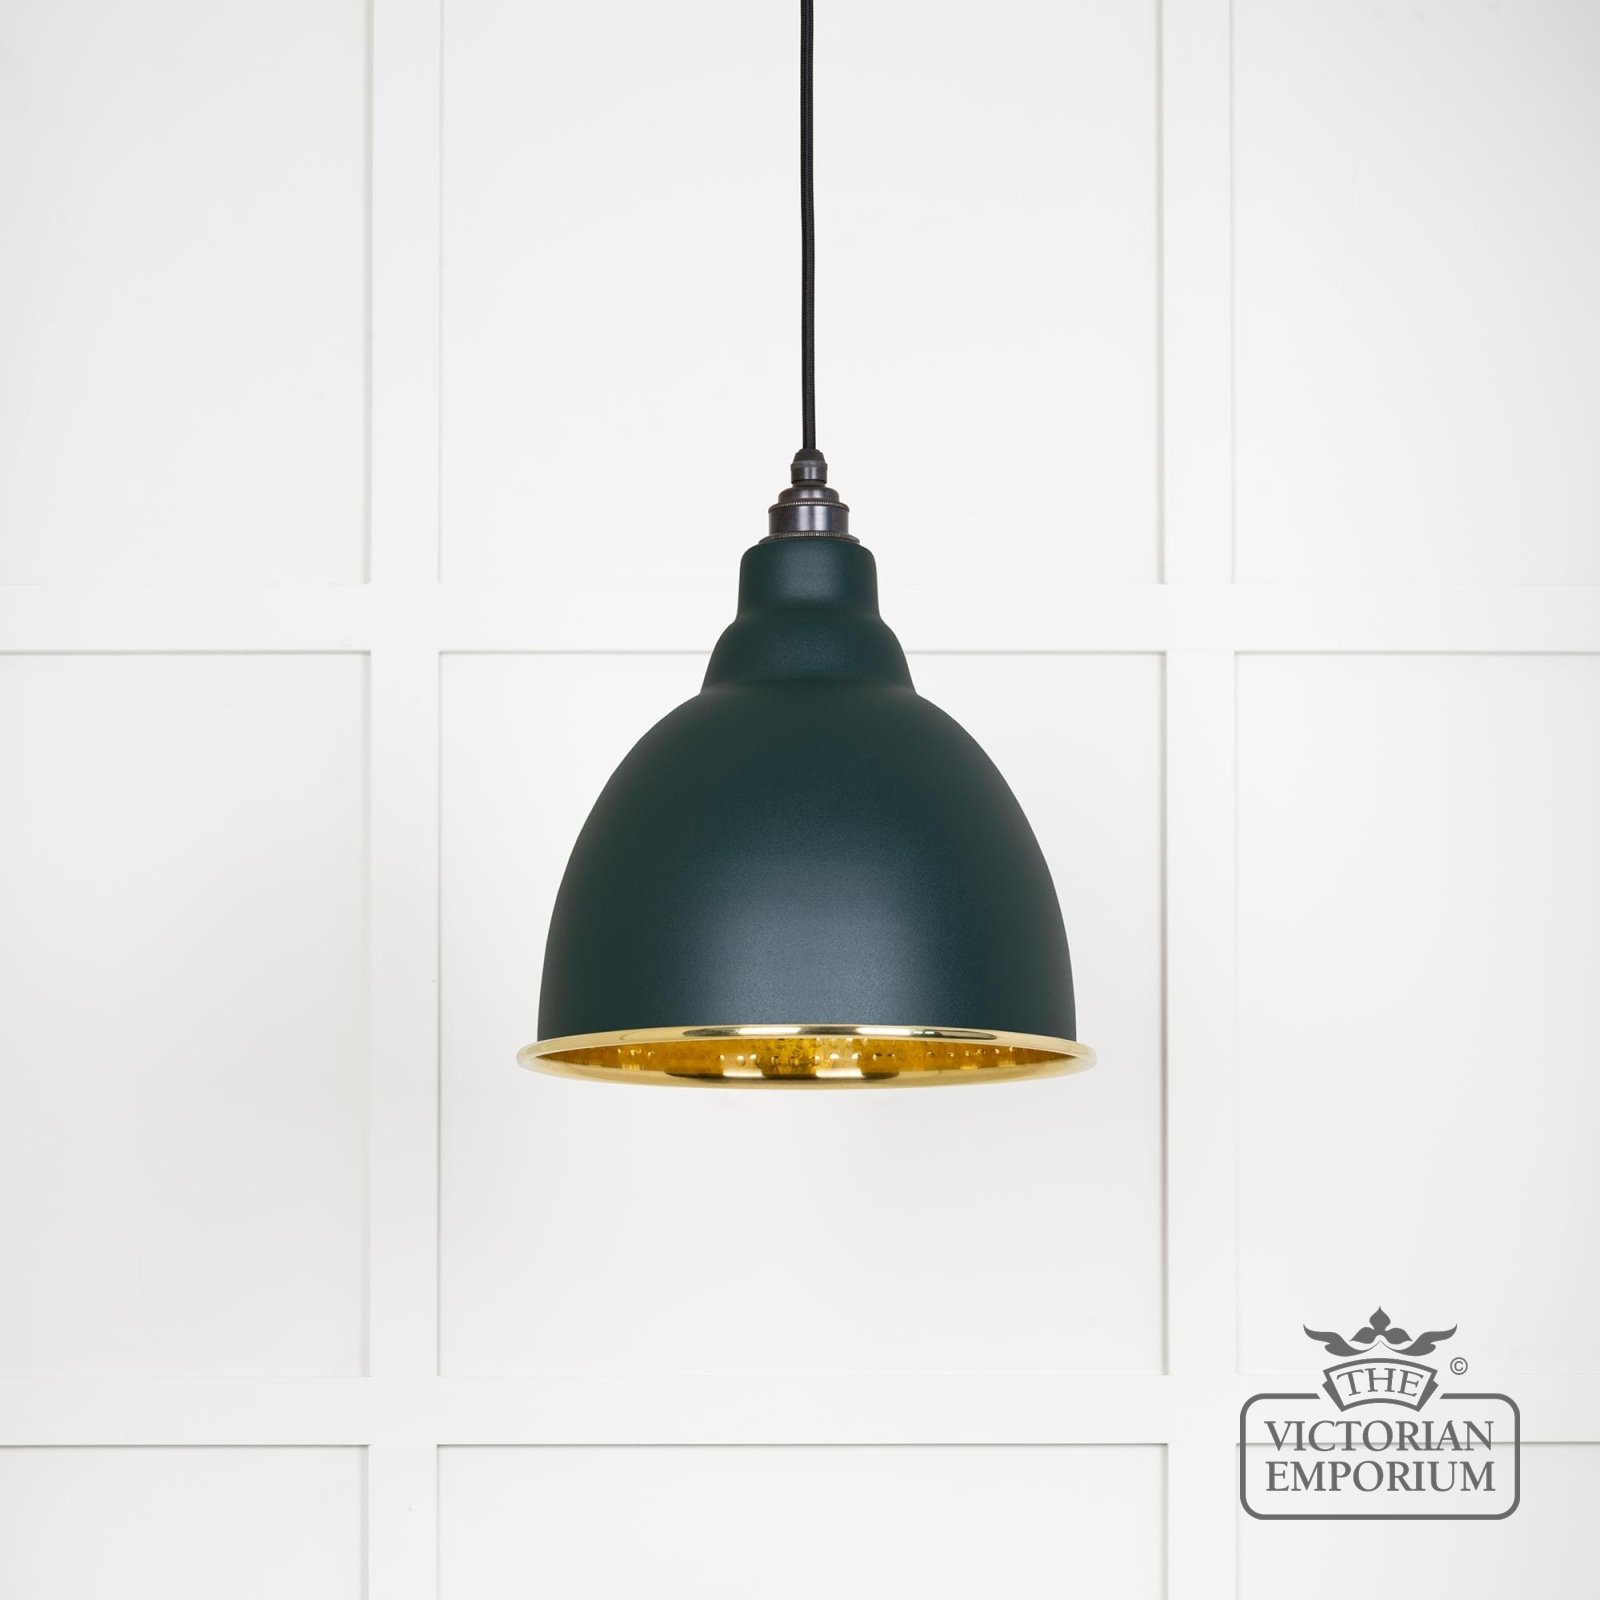 Brindle pendant light in Dingle with hammered brass interior